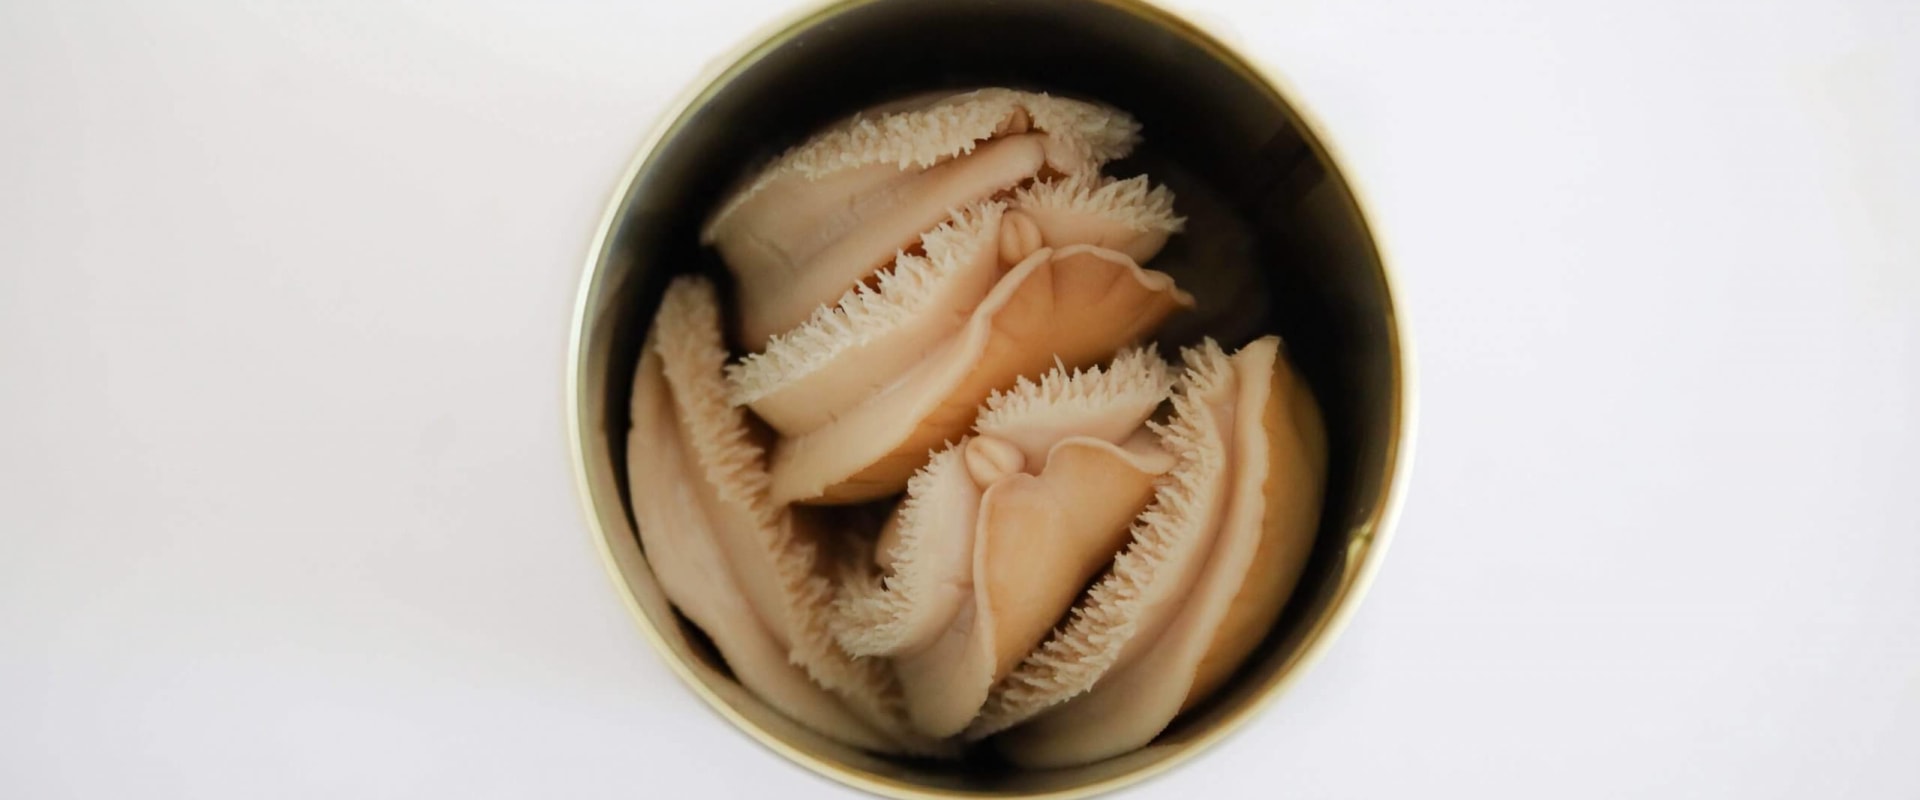 Pros and Cons of Specific Canned Abalone Products